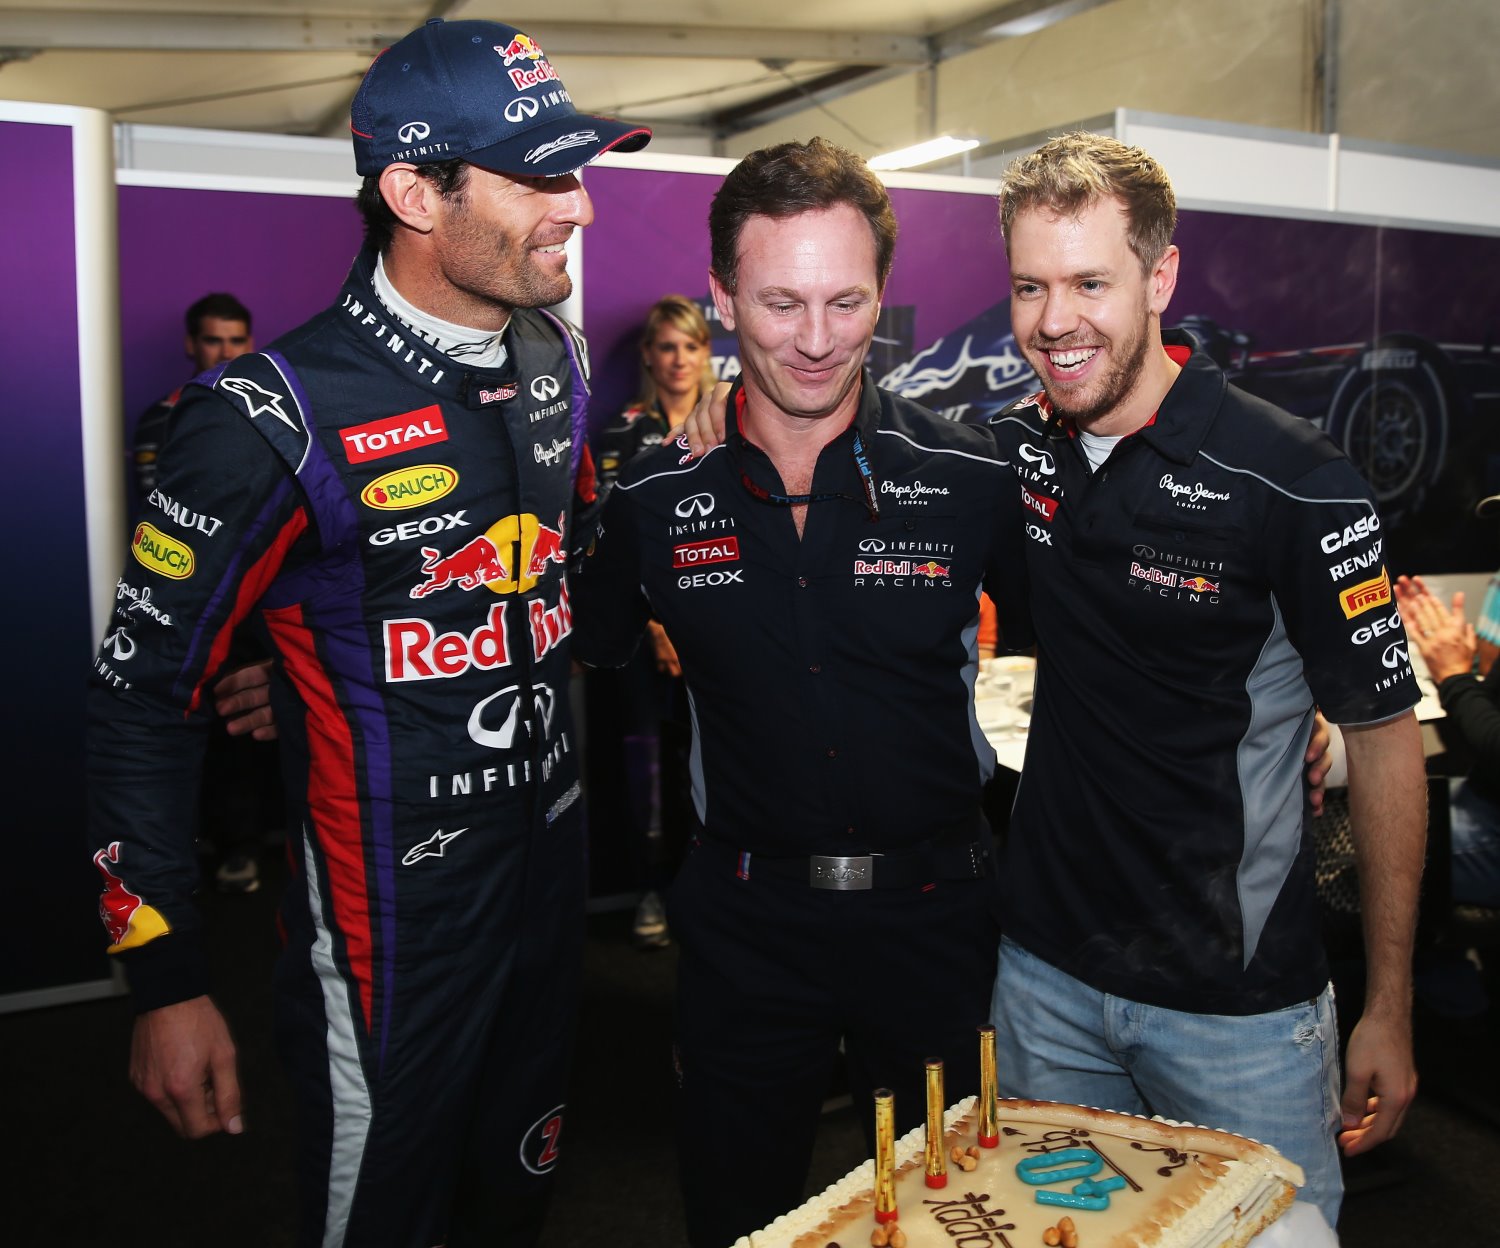 FORMULA 1 - Grand Prix of USA, Circuit of The Americas. Image shows Mark Webber (AUS) and Sebastian Vettel (GER/ Red Bull Racing) bring out a cake for their Team Principal Christian Horner as he celebrates his 40th birthday. Photo: Getty Images/ Mark Thompson - For editorial use only. Image is free of charge